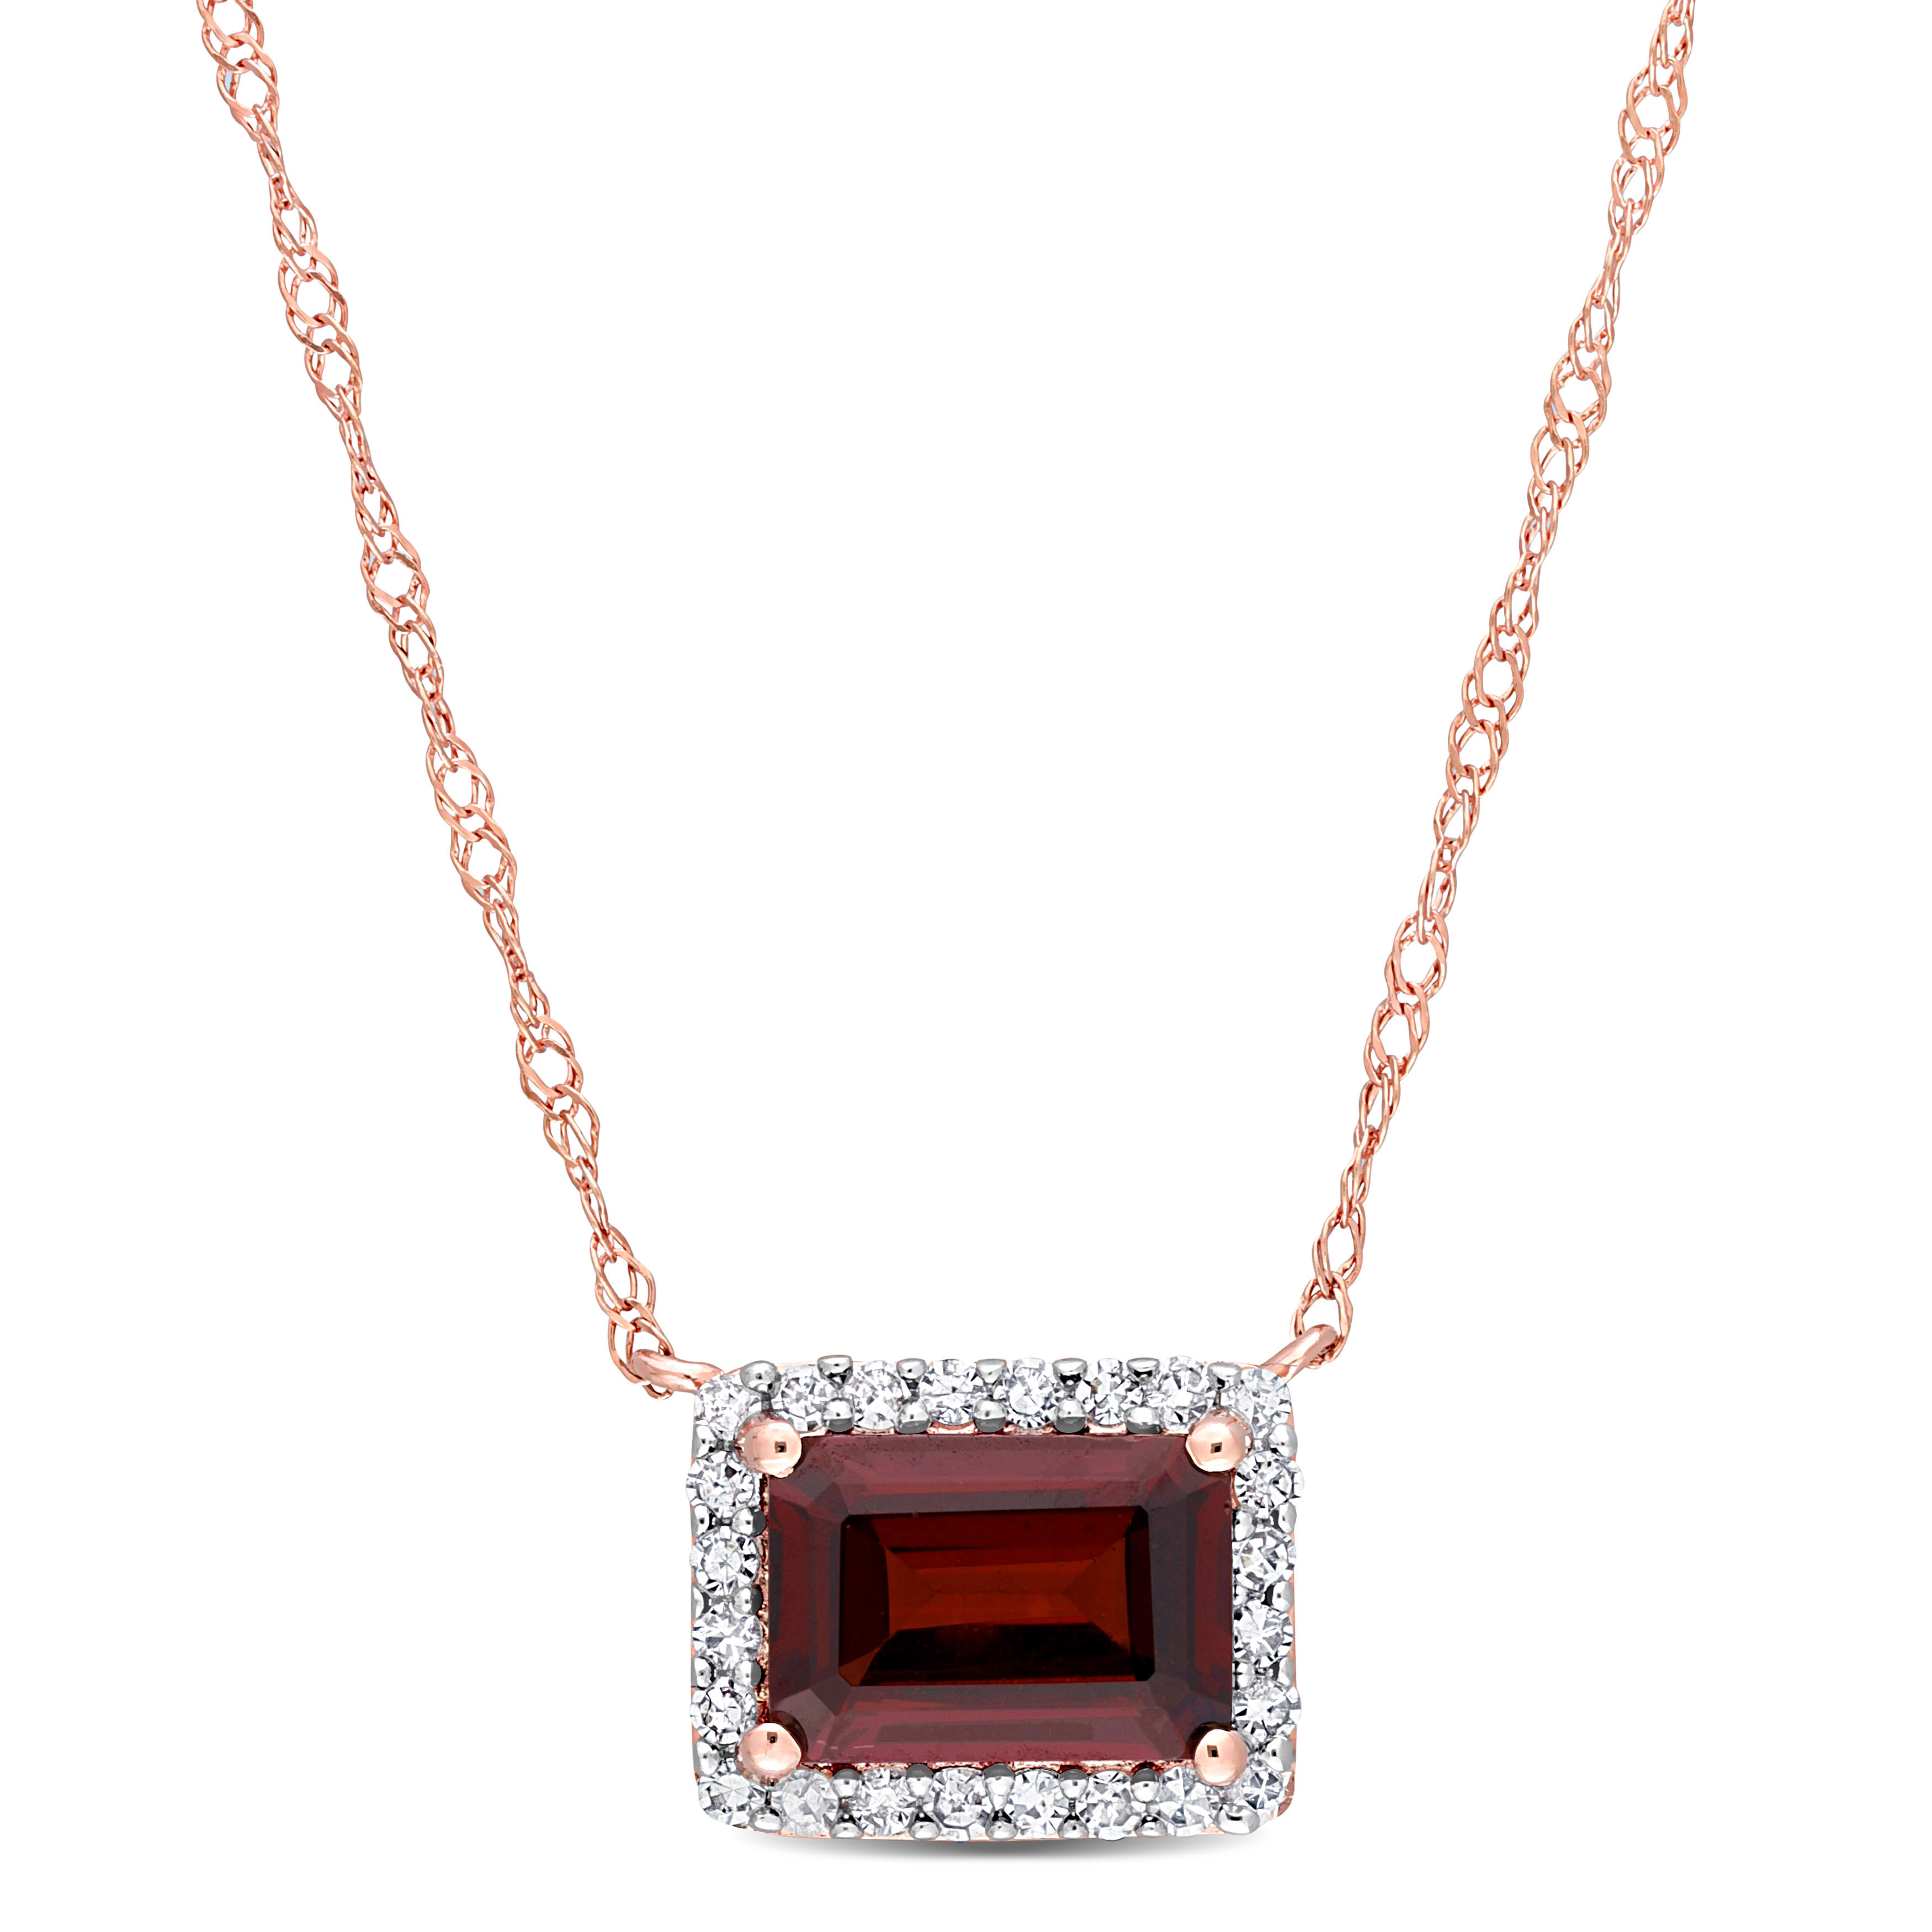 1 1/4 CT TGW Garnet and 1/8 CT TW Diamond Halo Square Necklace in 14k Rose Gold - 17 in.